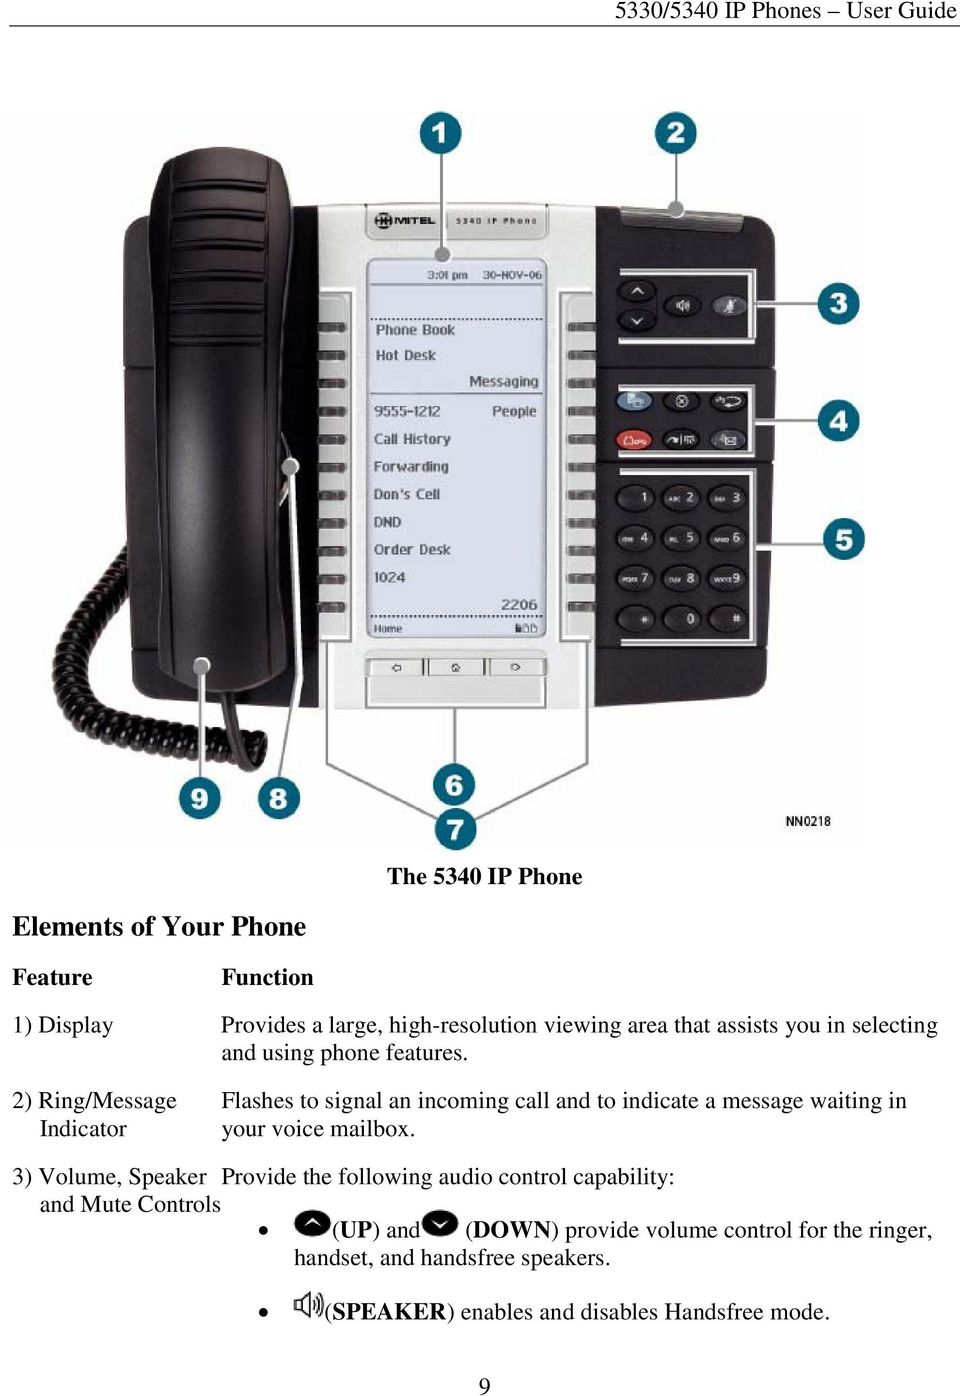 2) Ring/Message Indicator Flashes to signal an incoming call and to indicate a message waiting in your voice mailbox.